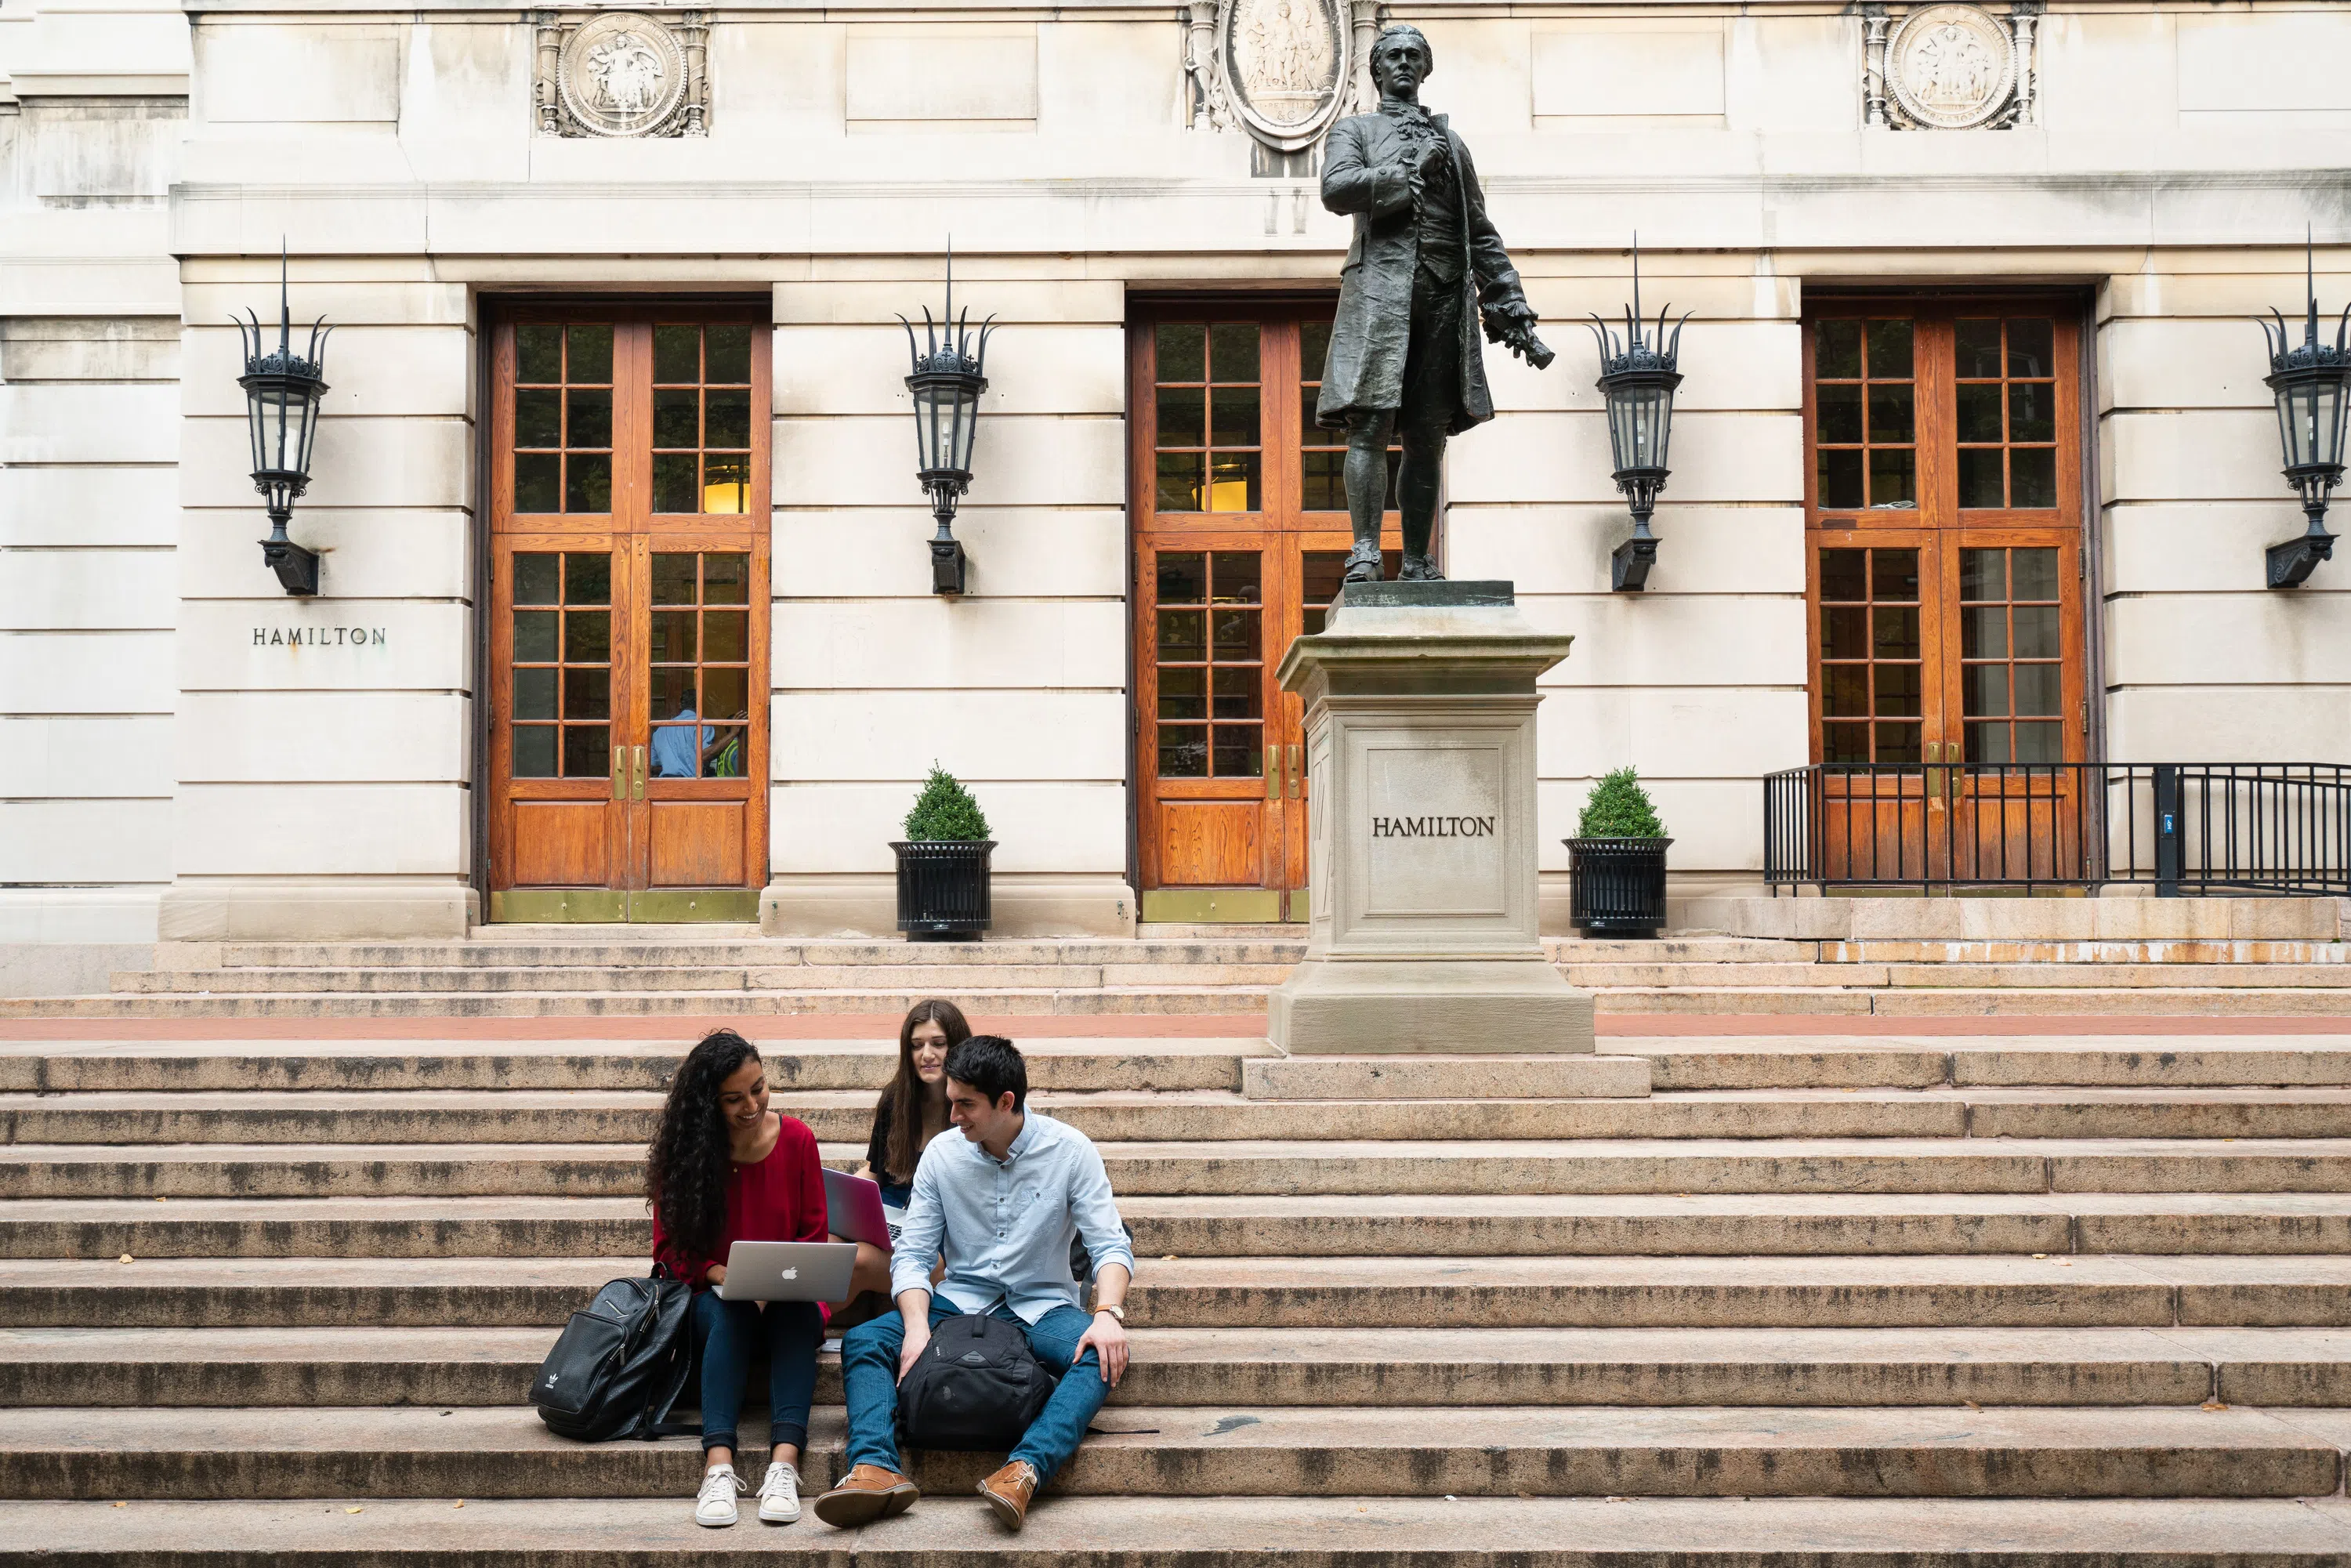 Three students sit on a set of stairs in the foreground with a bronze statue of Alexander Hamilton to the right. A classroom building sits in the background with three entryways.